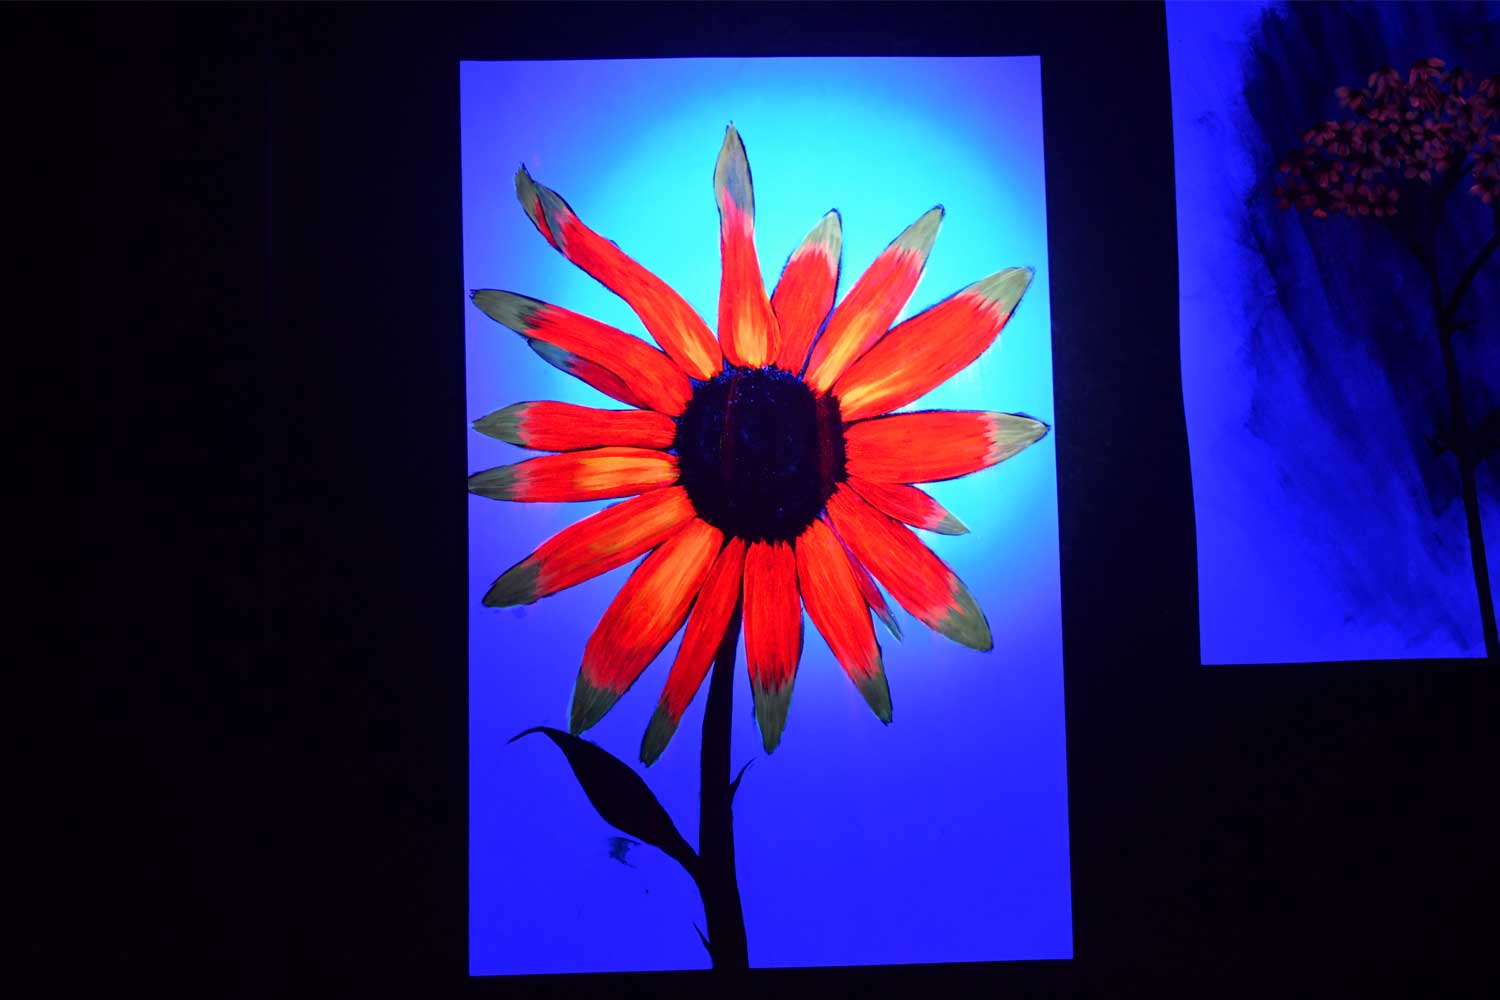 Picture on display in UV light.